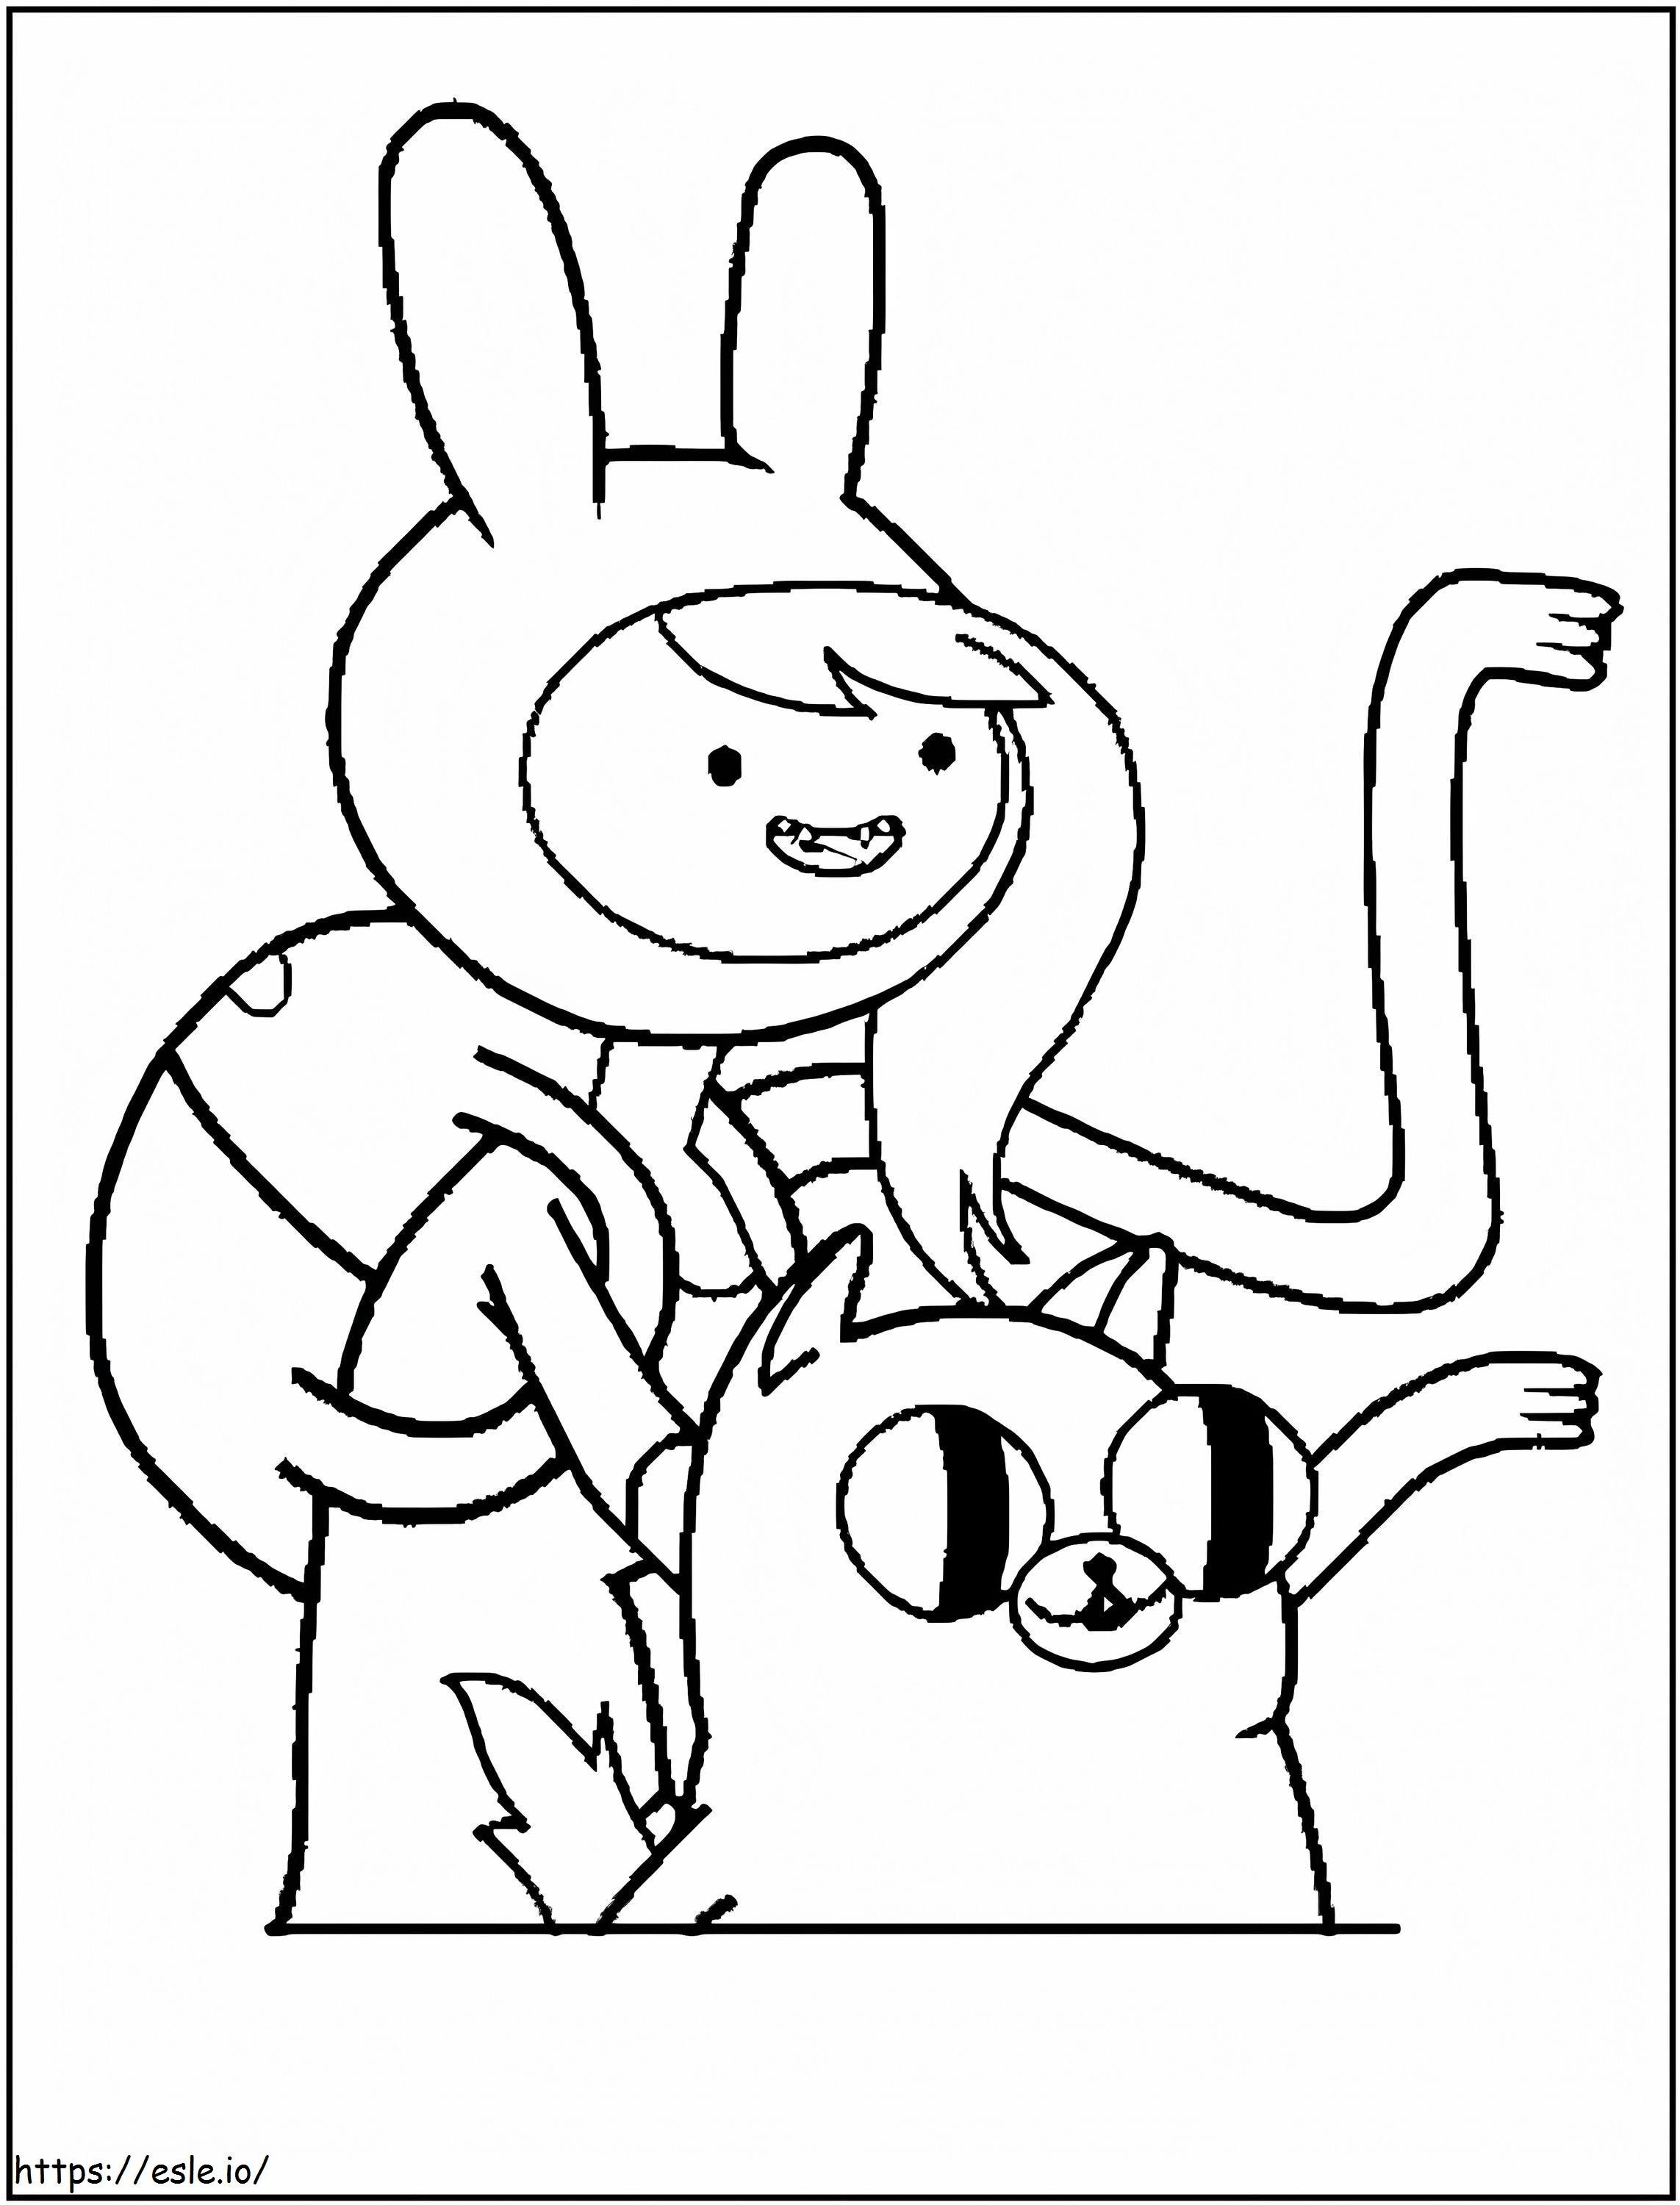 Fionna And Jake The Dog coloring page